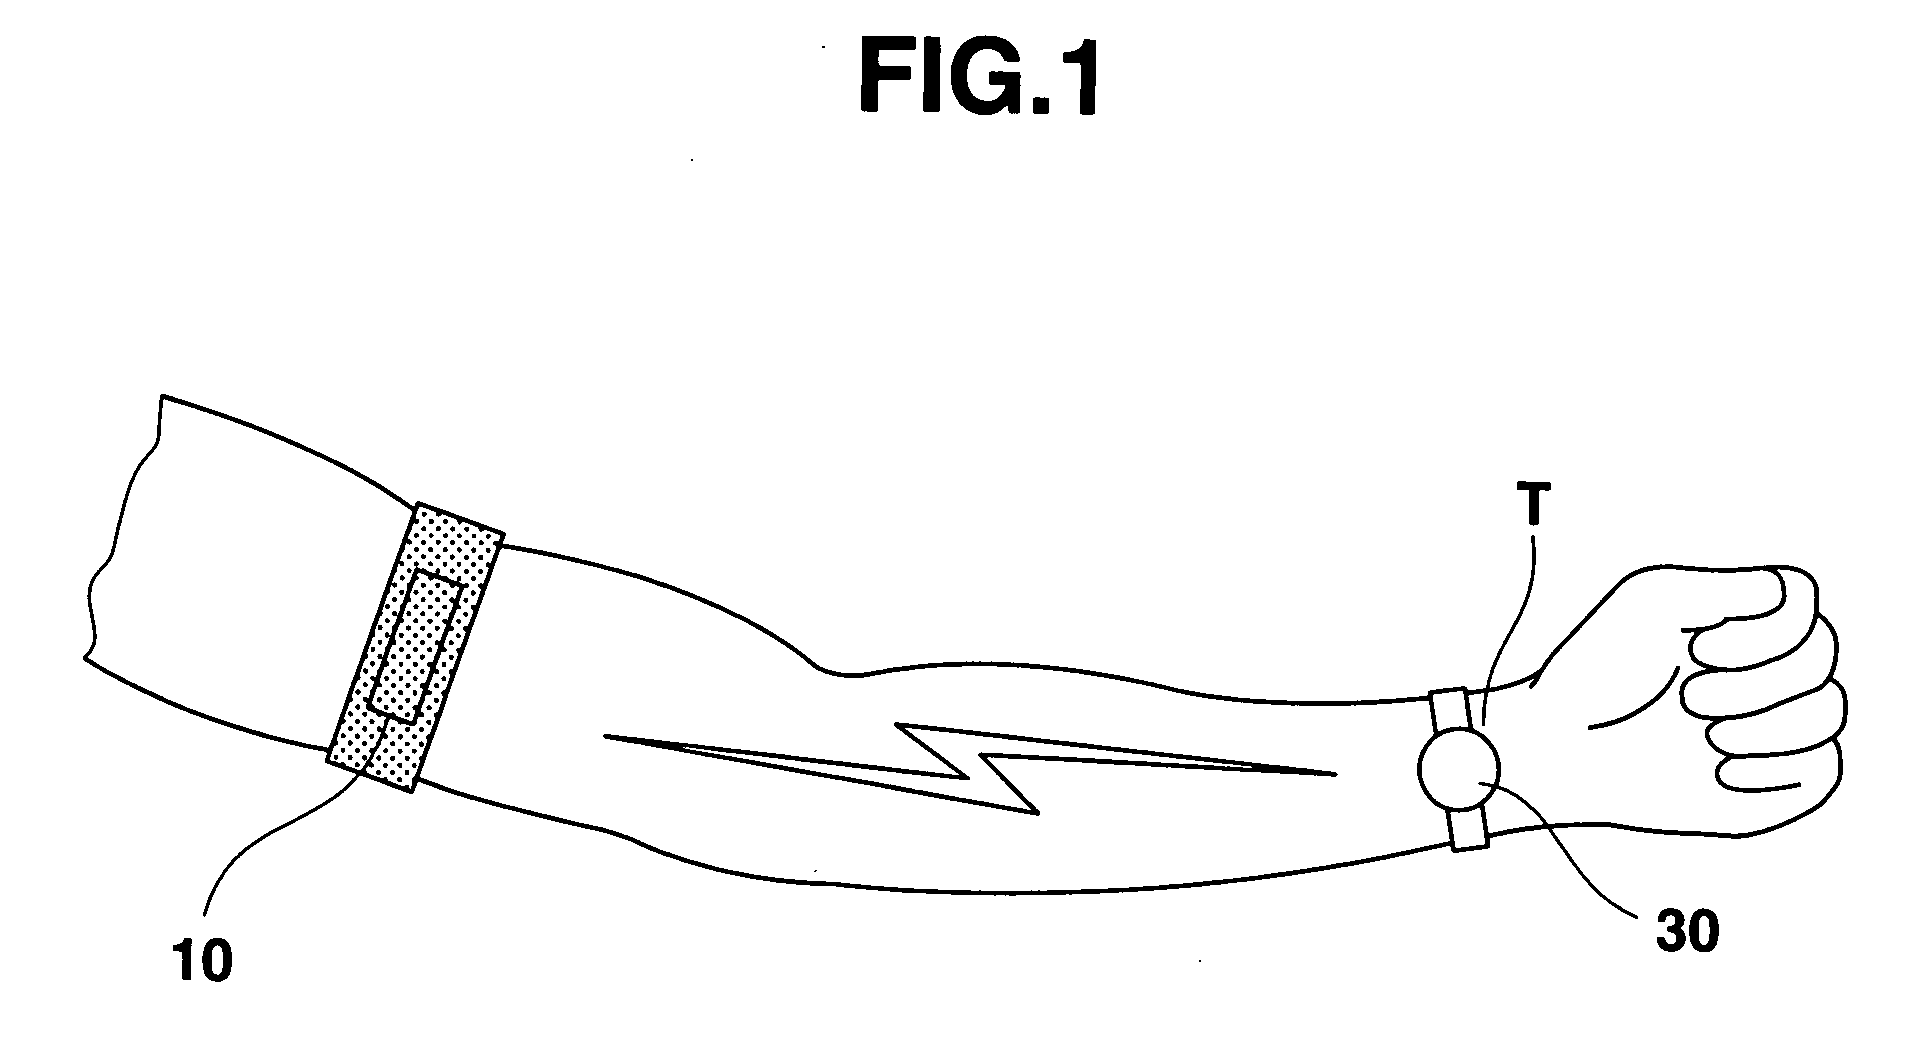 Living body information measuring apparatus and system